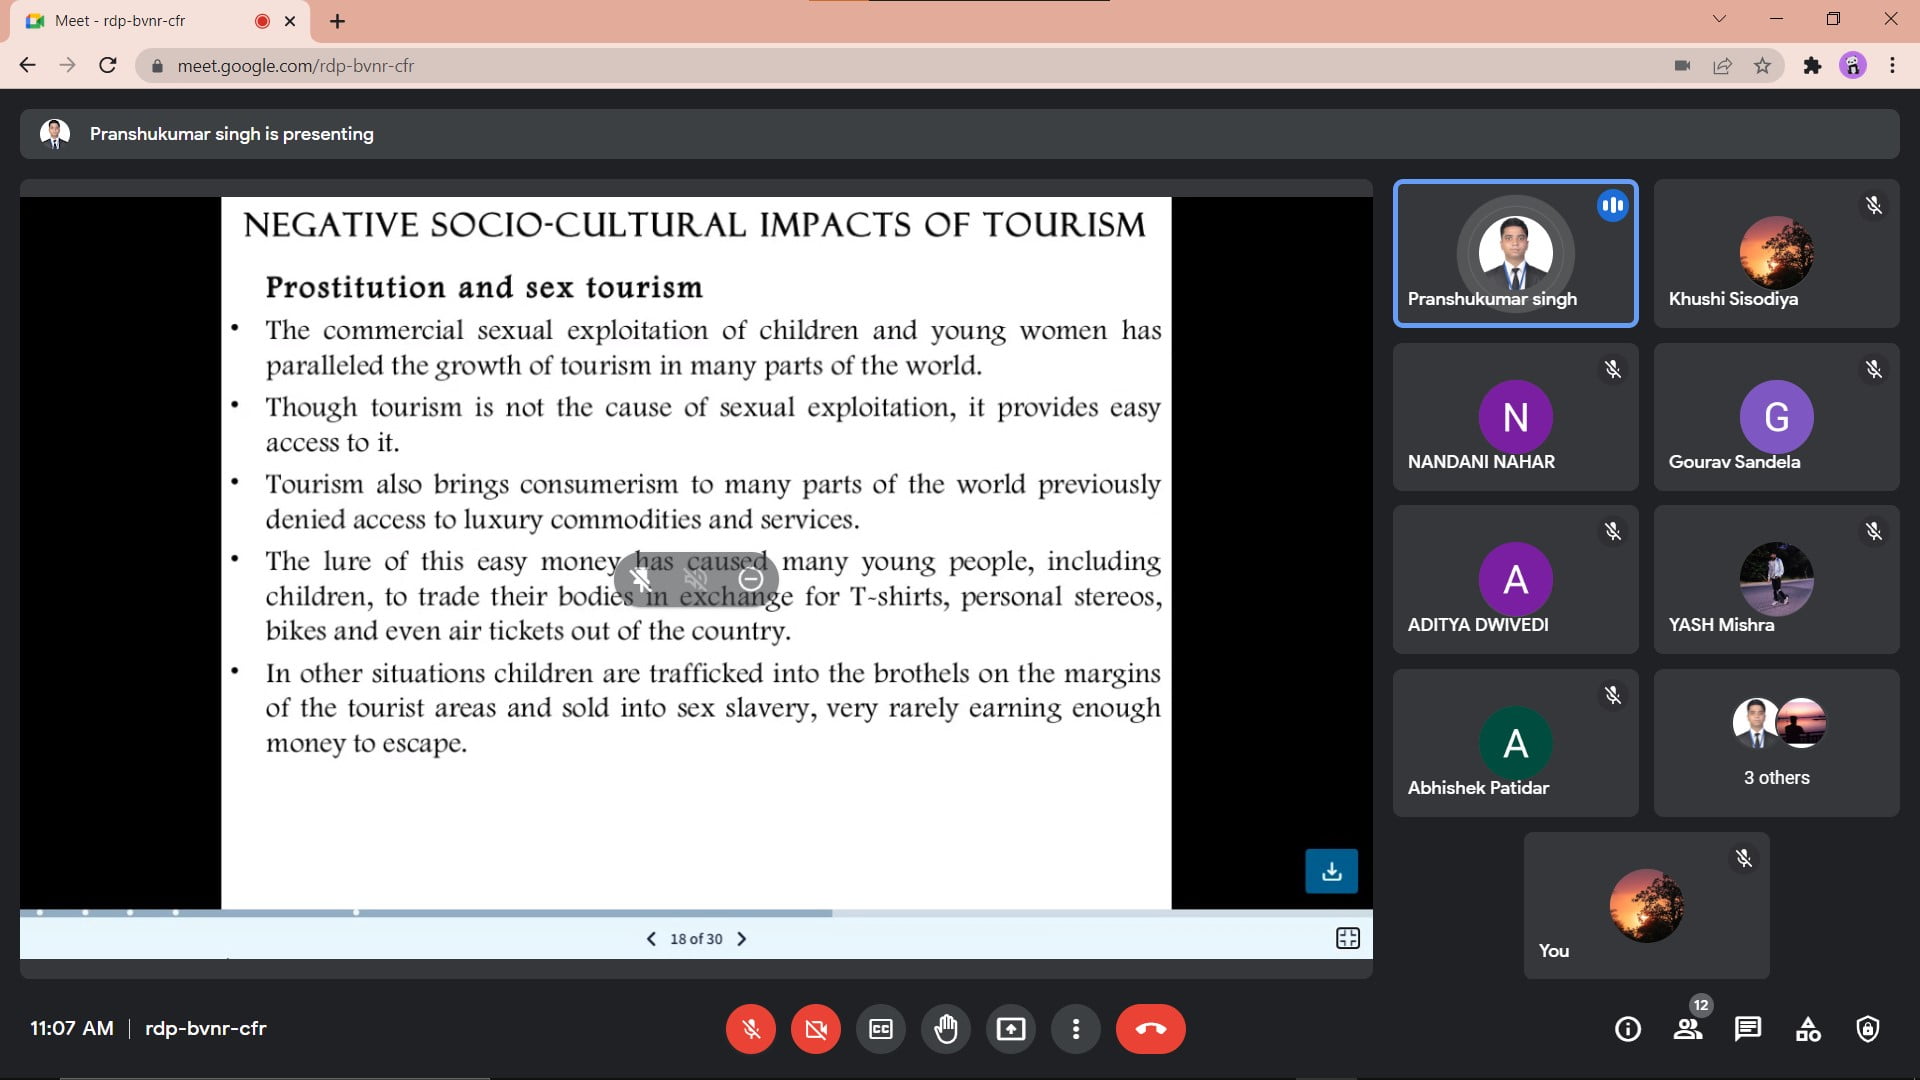 Webinar on 3 R’s of tourism Reduce, Reuse, Respect for Sustainable Tourism